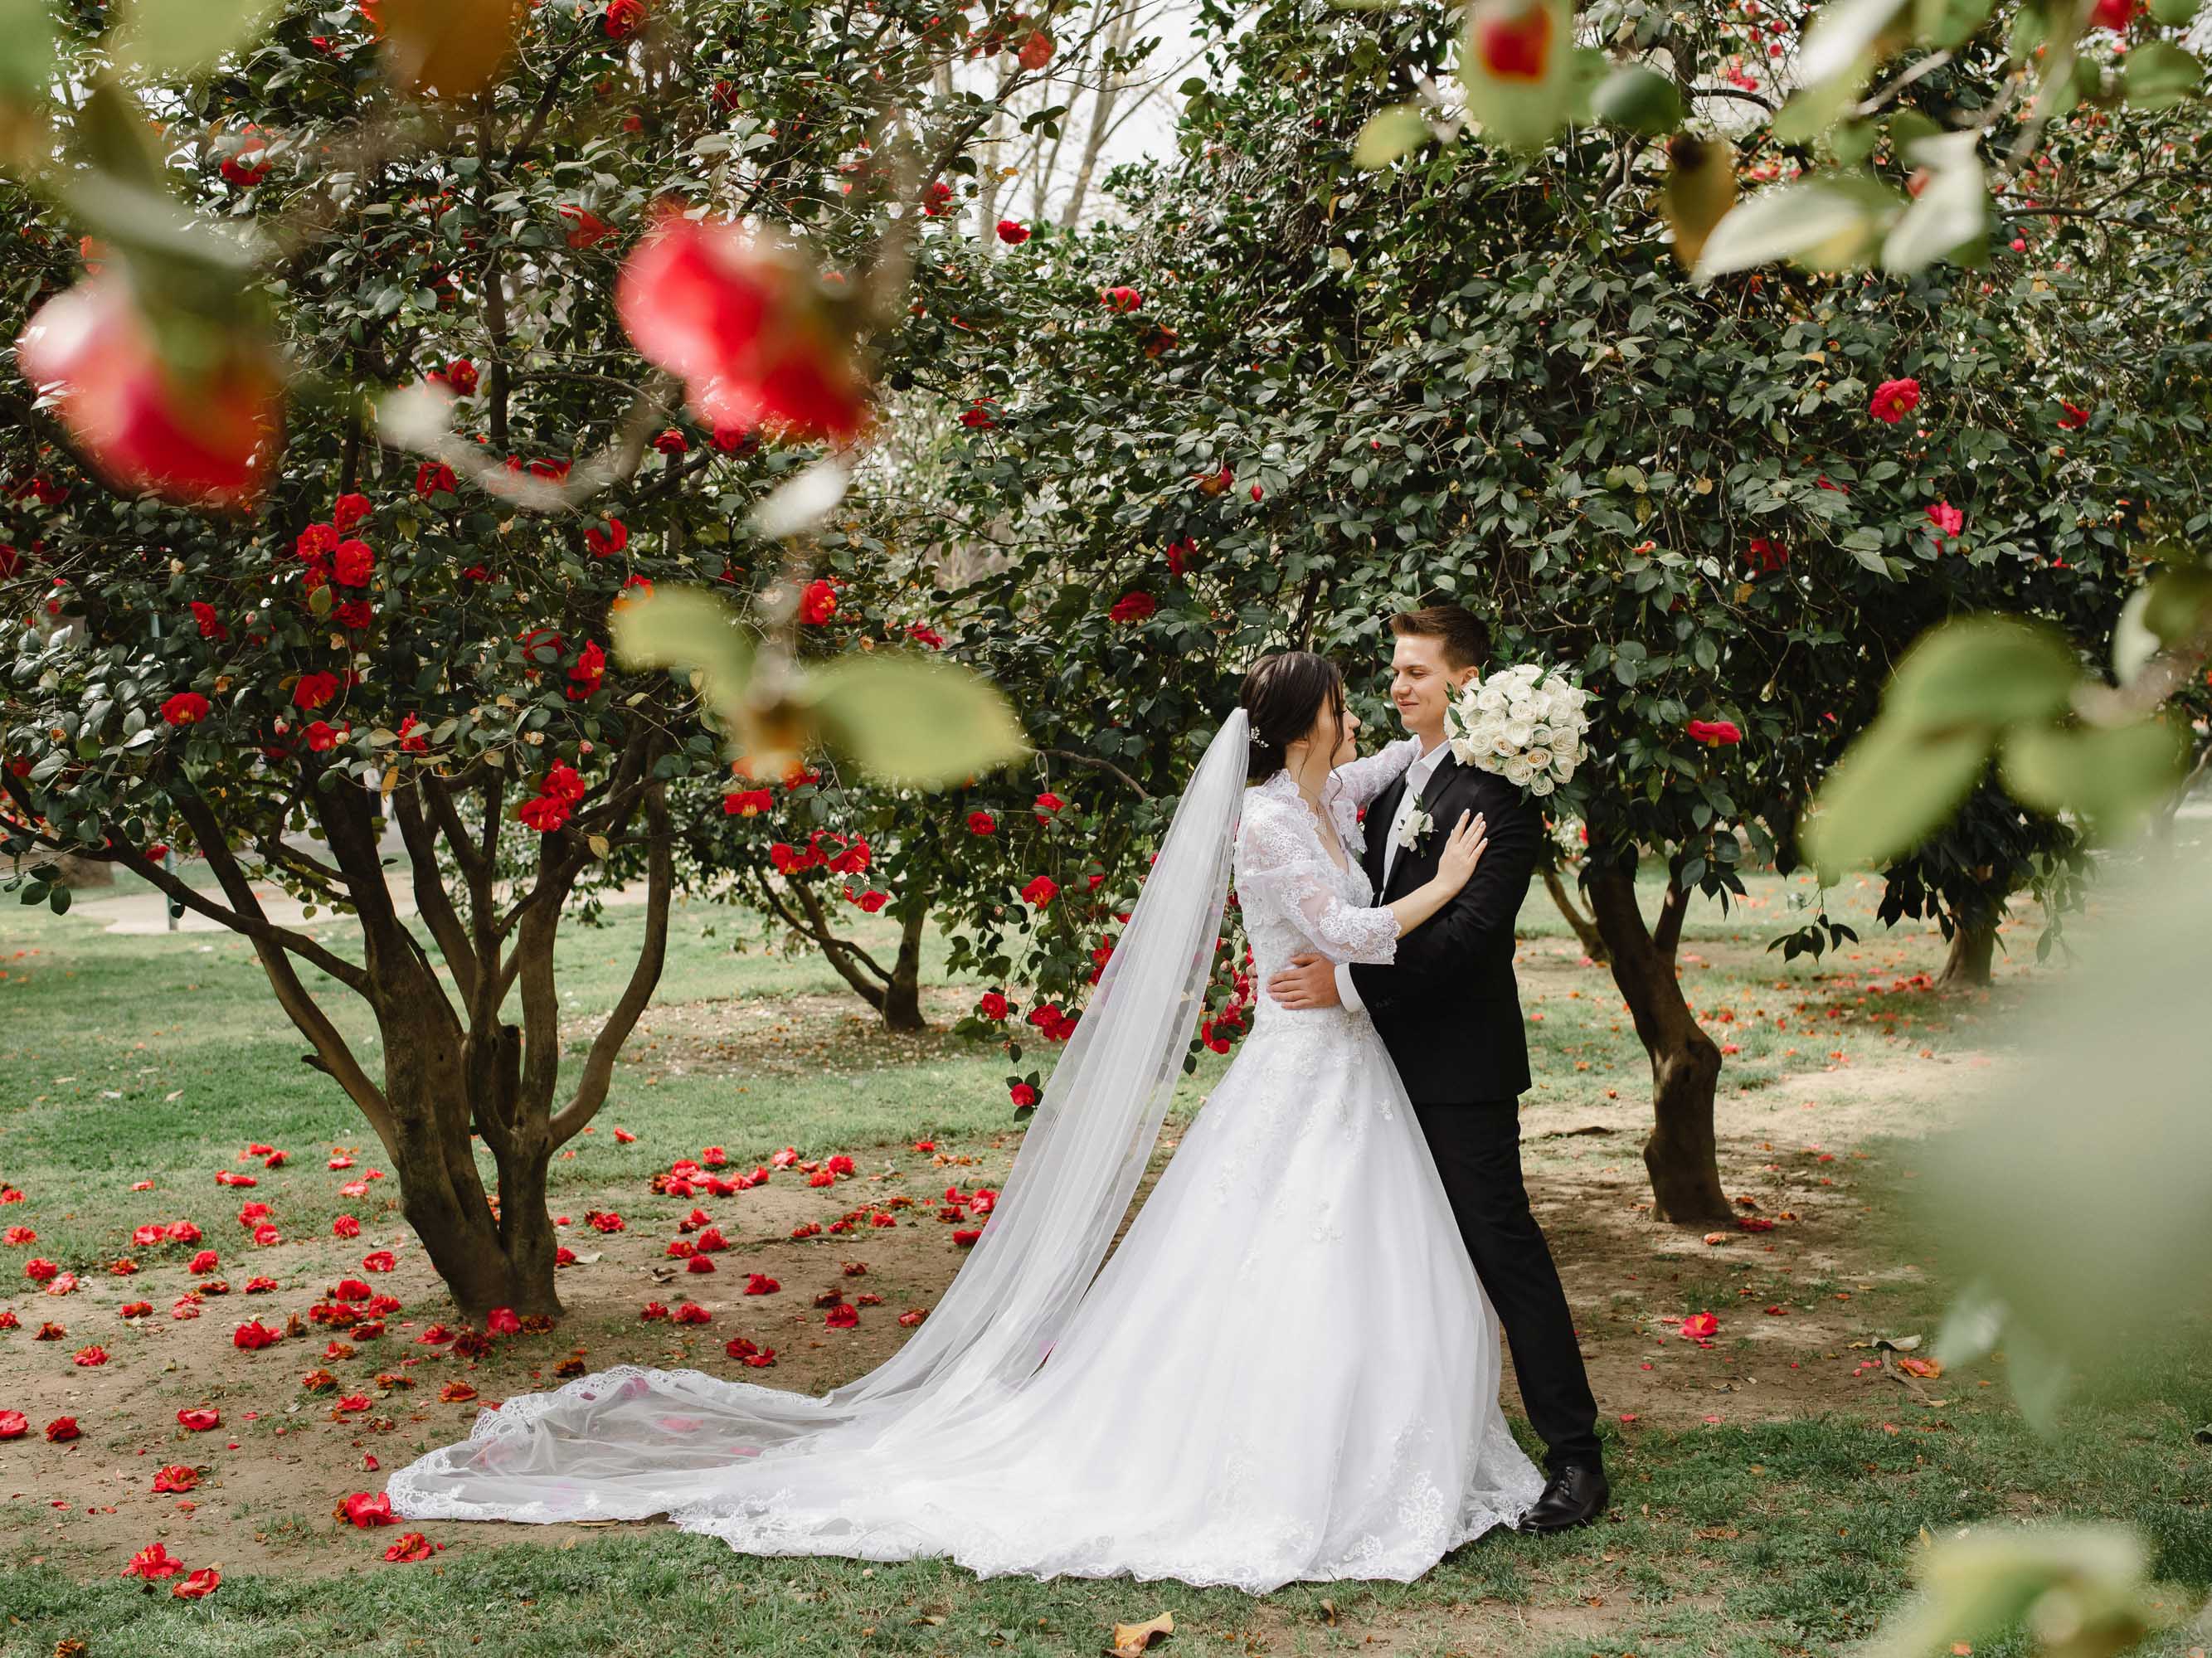 A bride and groom standing in an orchard with red roses.